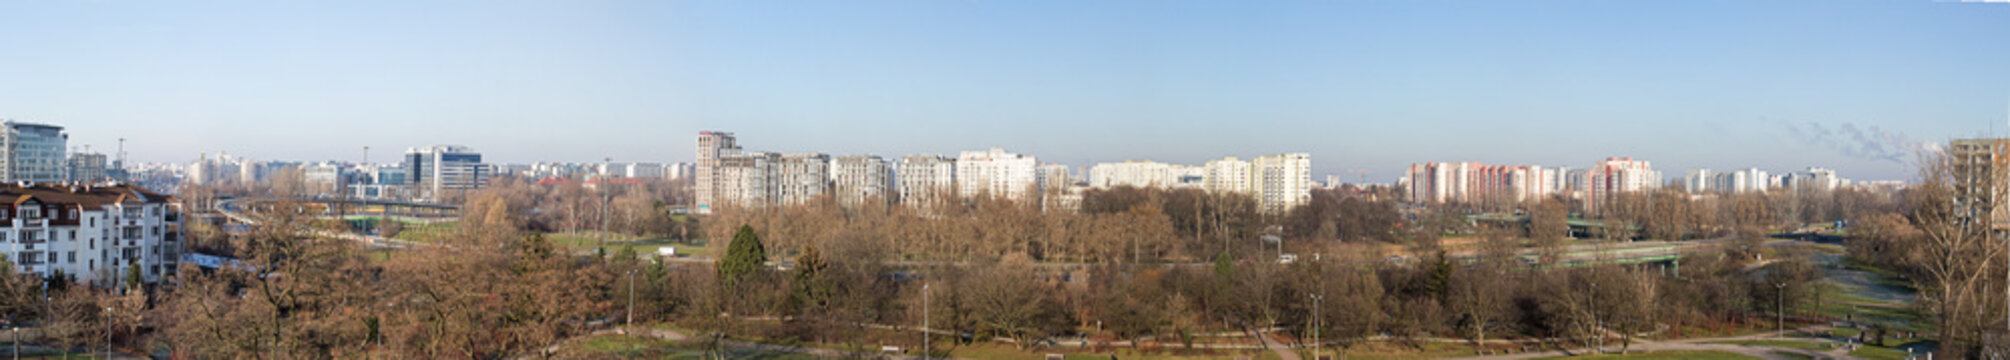 Warsaw - view of the Ursynów housing estate - a large panorama